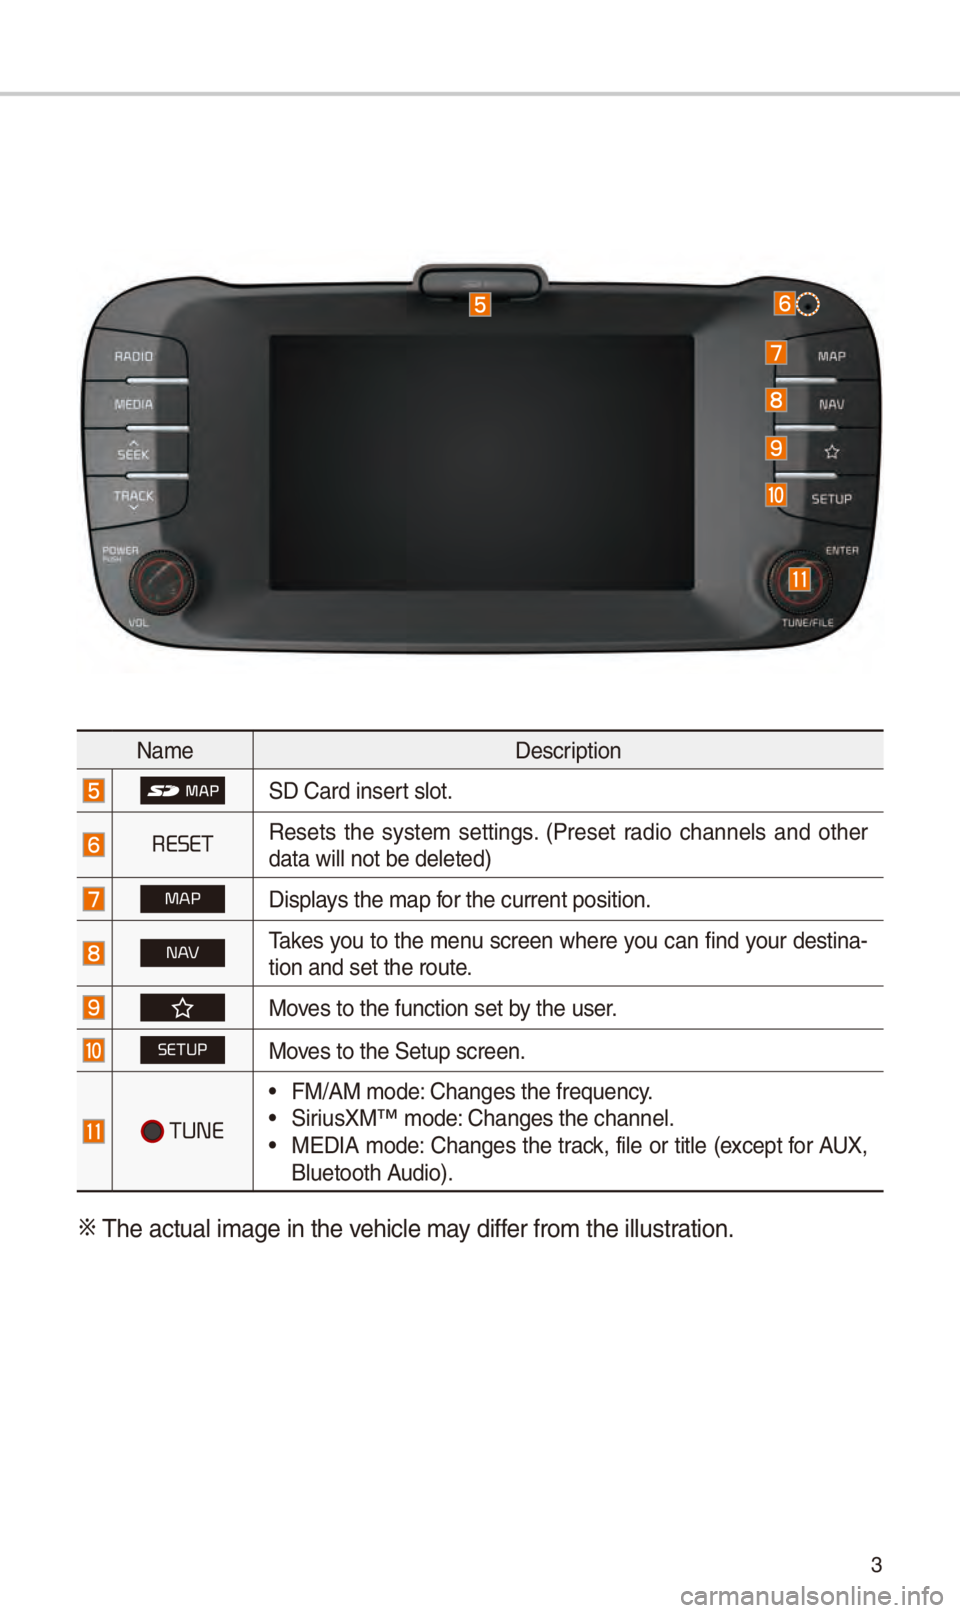 KIA SOUL 2018  Navigation System Quick Reference Guide 3
Nam\fD\fscription
SD Card ins\frt slot.
RESETR\fs\fts  th\f  syst\fm  s\fttings.  (Pr\fs\ft  radio  chann\fls  and  oth\fr 
data will not b\f d\f\Sl\ft\fd)
MAPDisplays th\f map for th\f curr\fnt pos